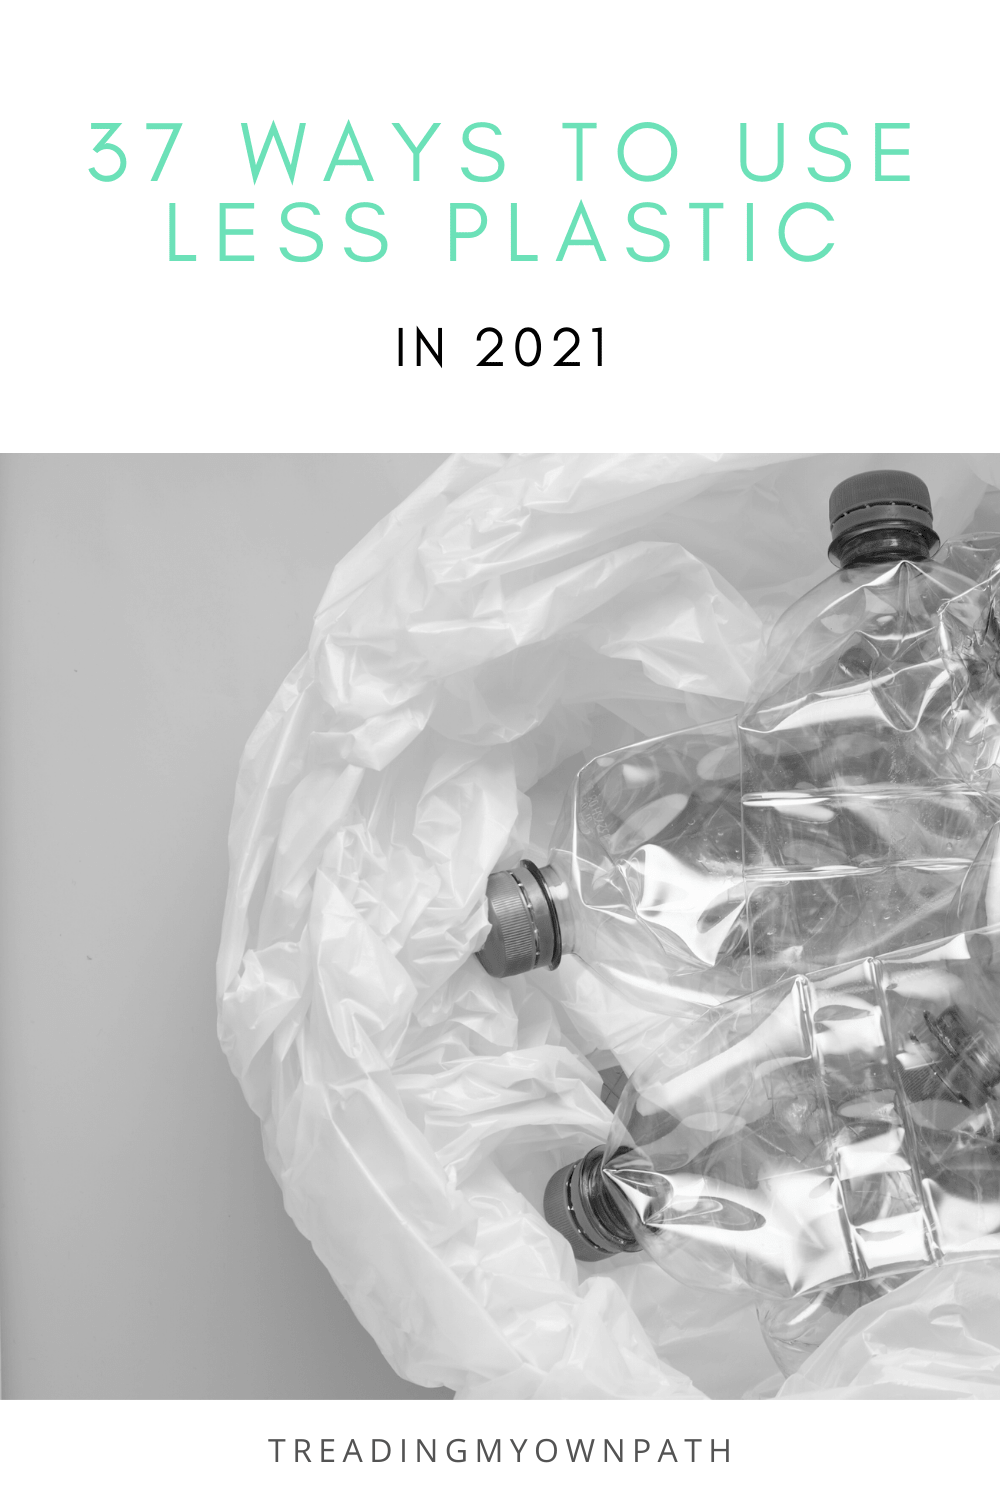 37 ways to use less plastic in 2021